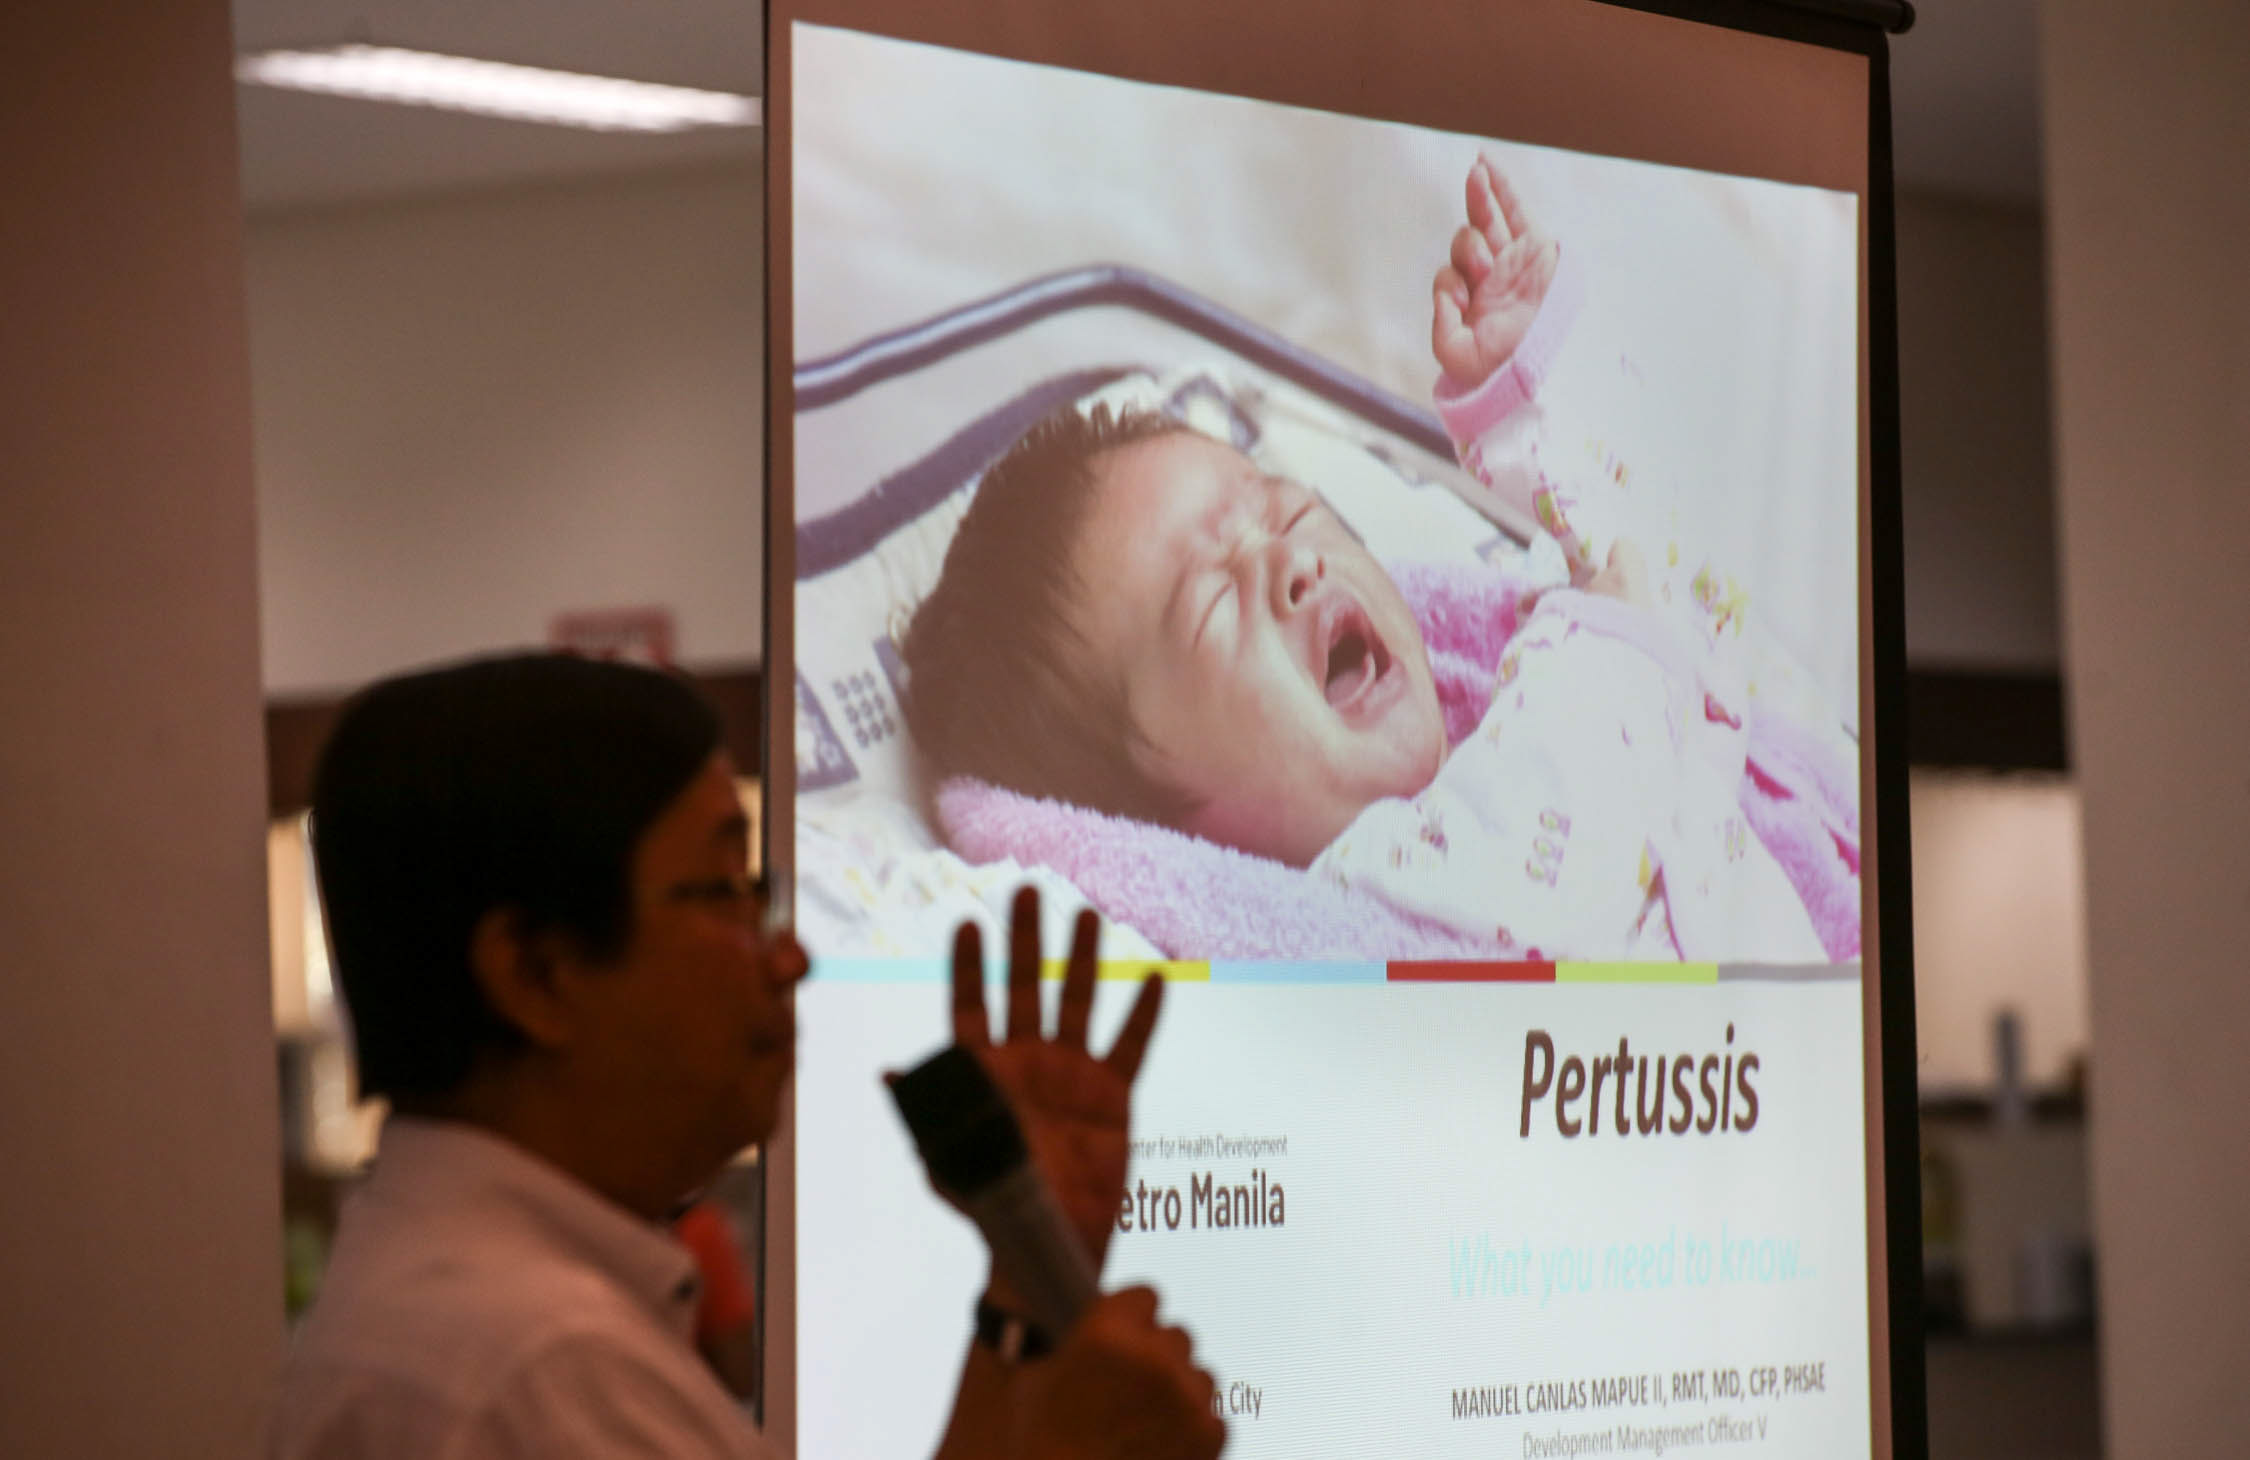  Most pertussis fatalities are infants - DOH